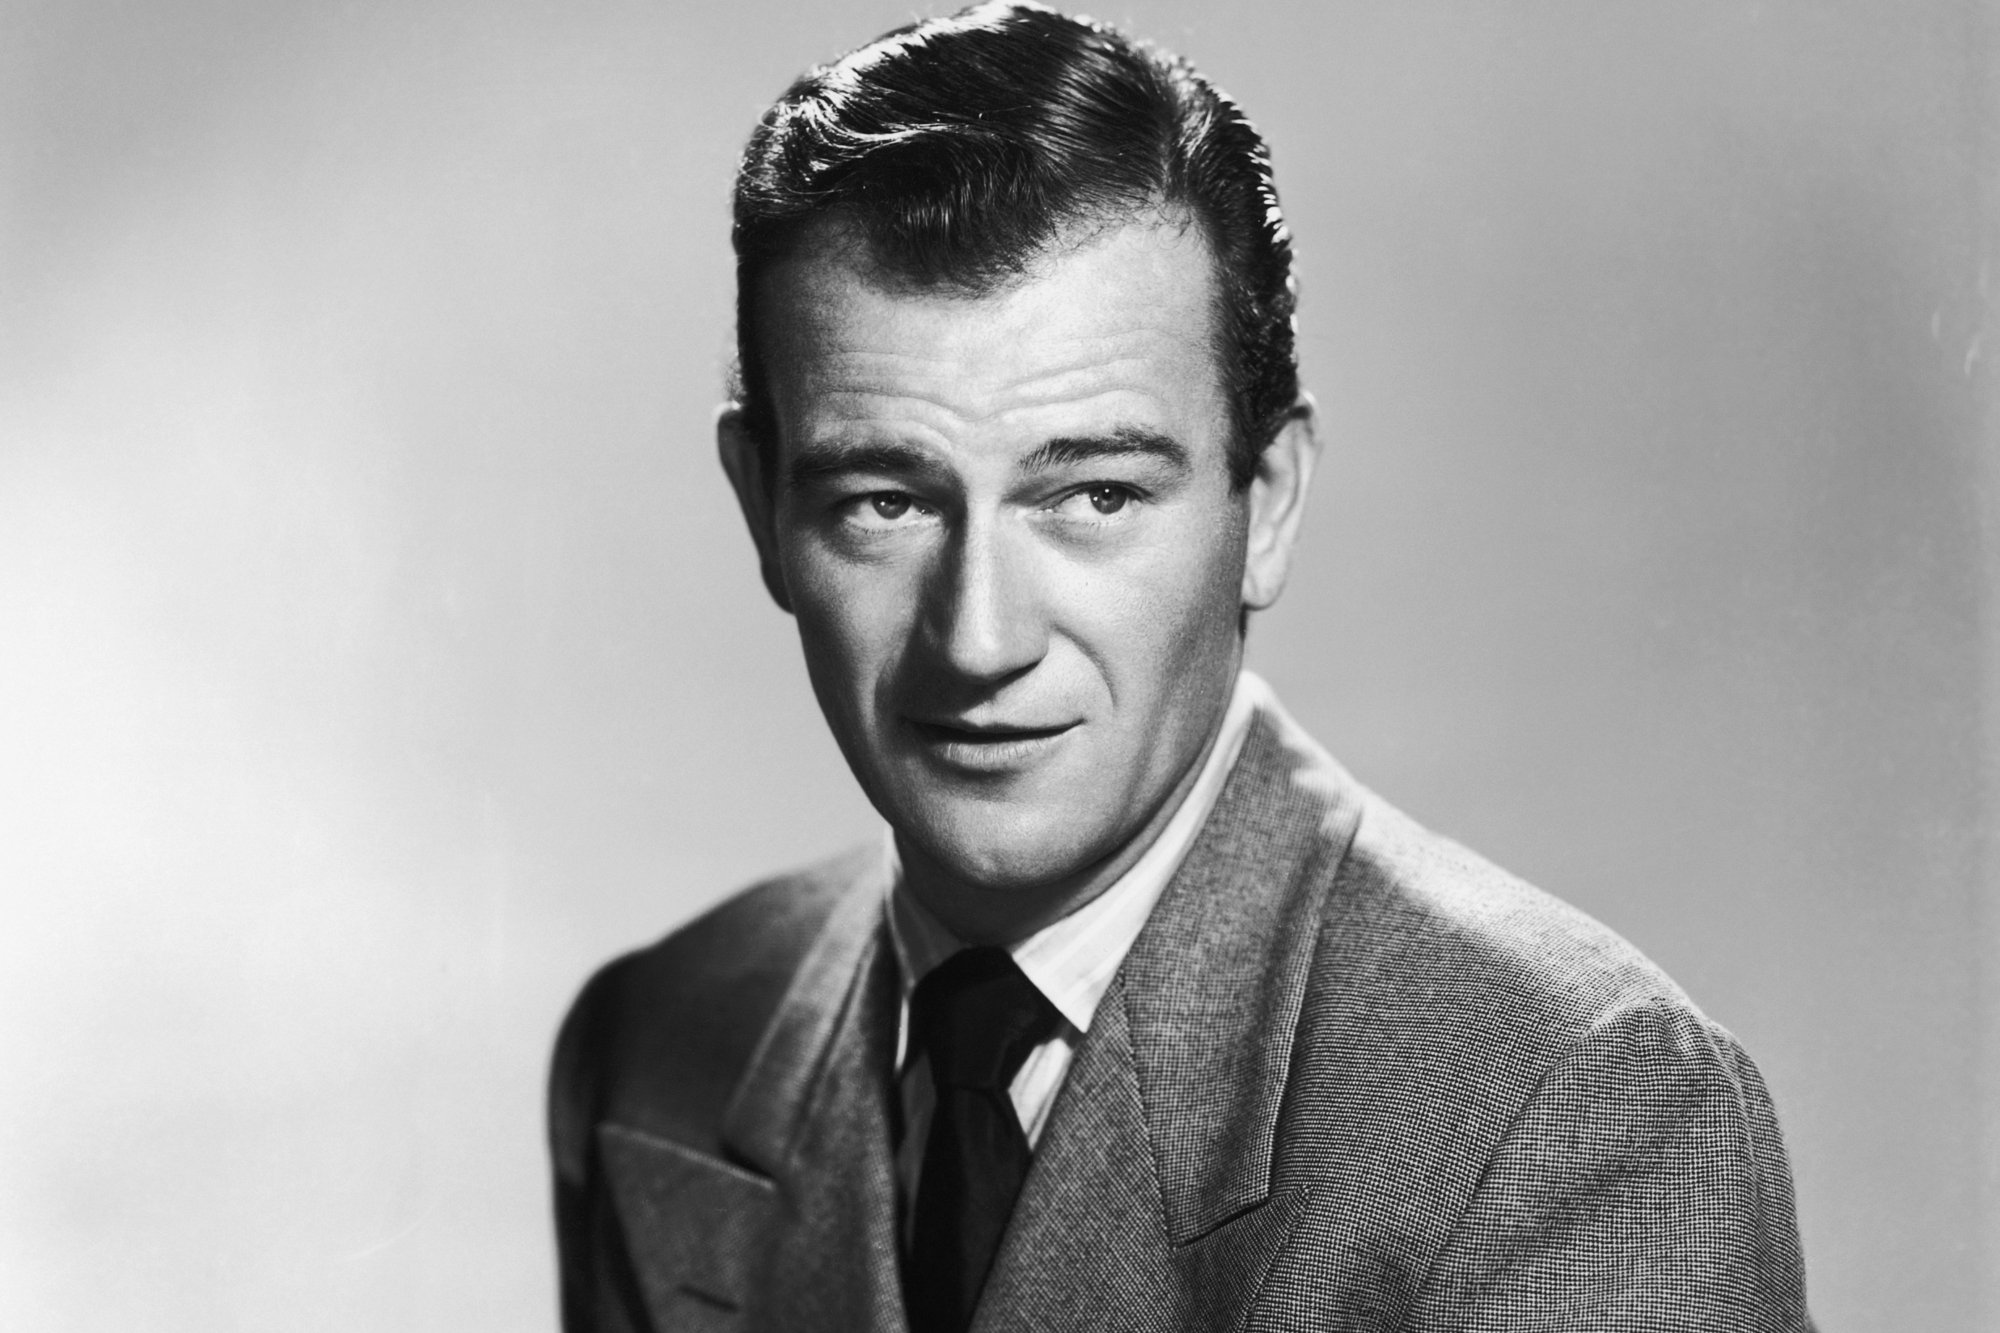 John Wayne, who loved Halloween candy, in a black-and-white photograph wearing a suit